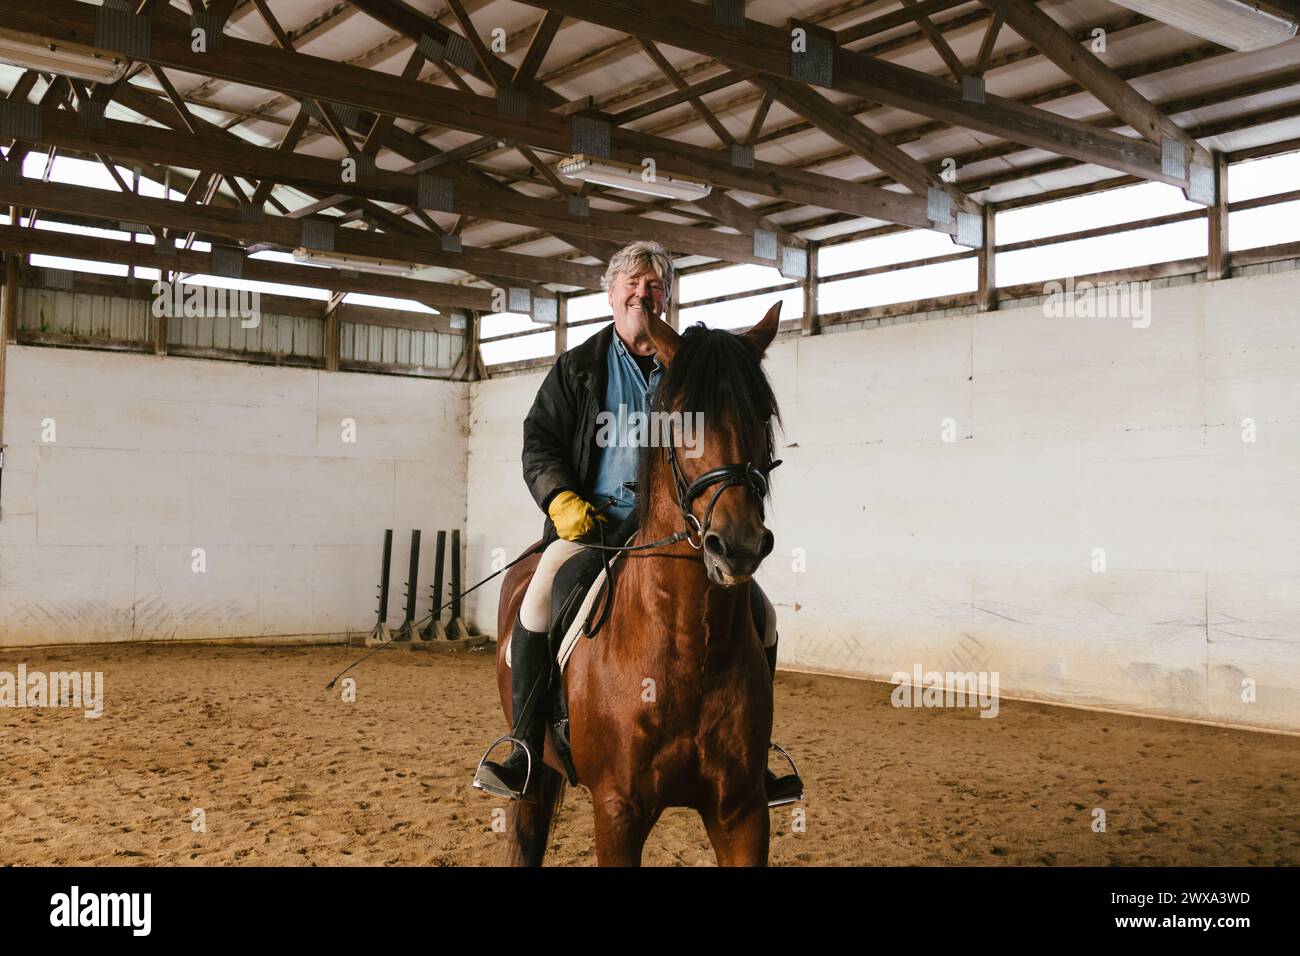 Older man with gray hair riding a horse with a saddle indoor arena Stock Photo